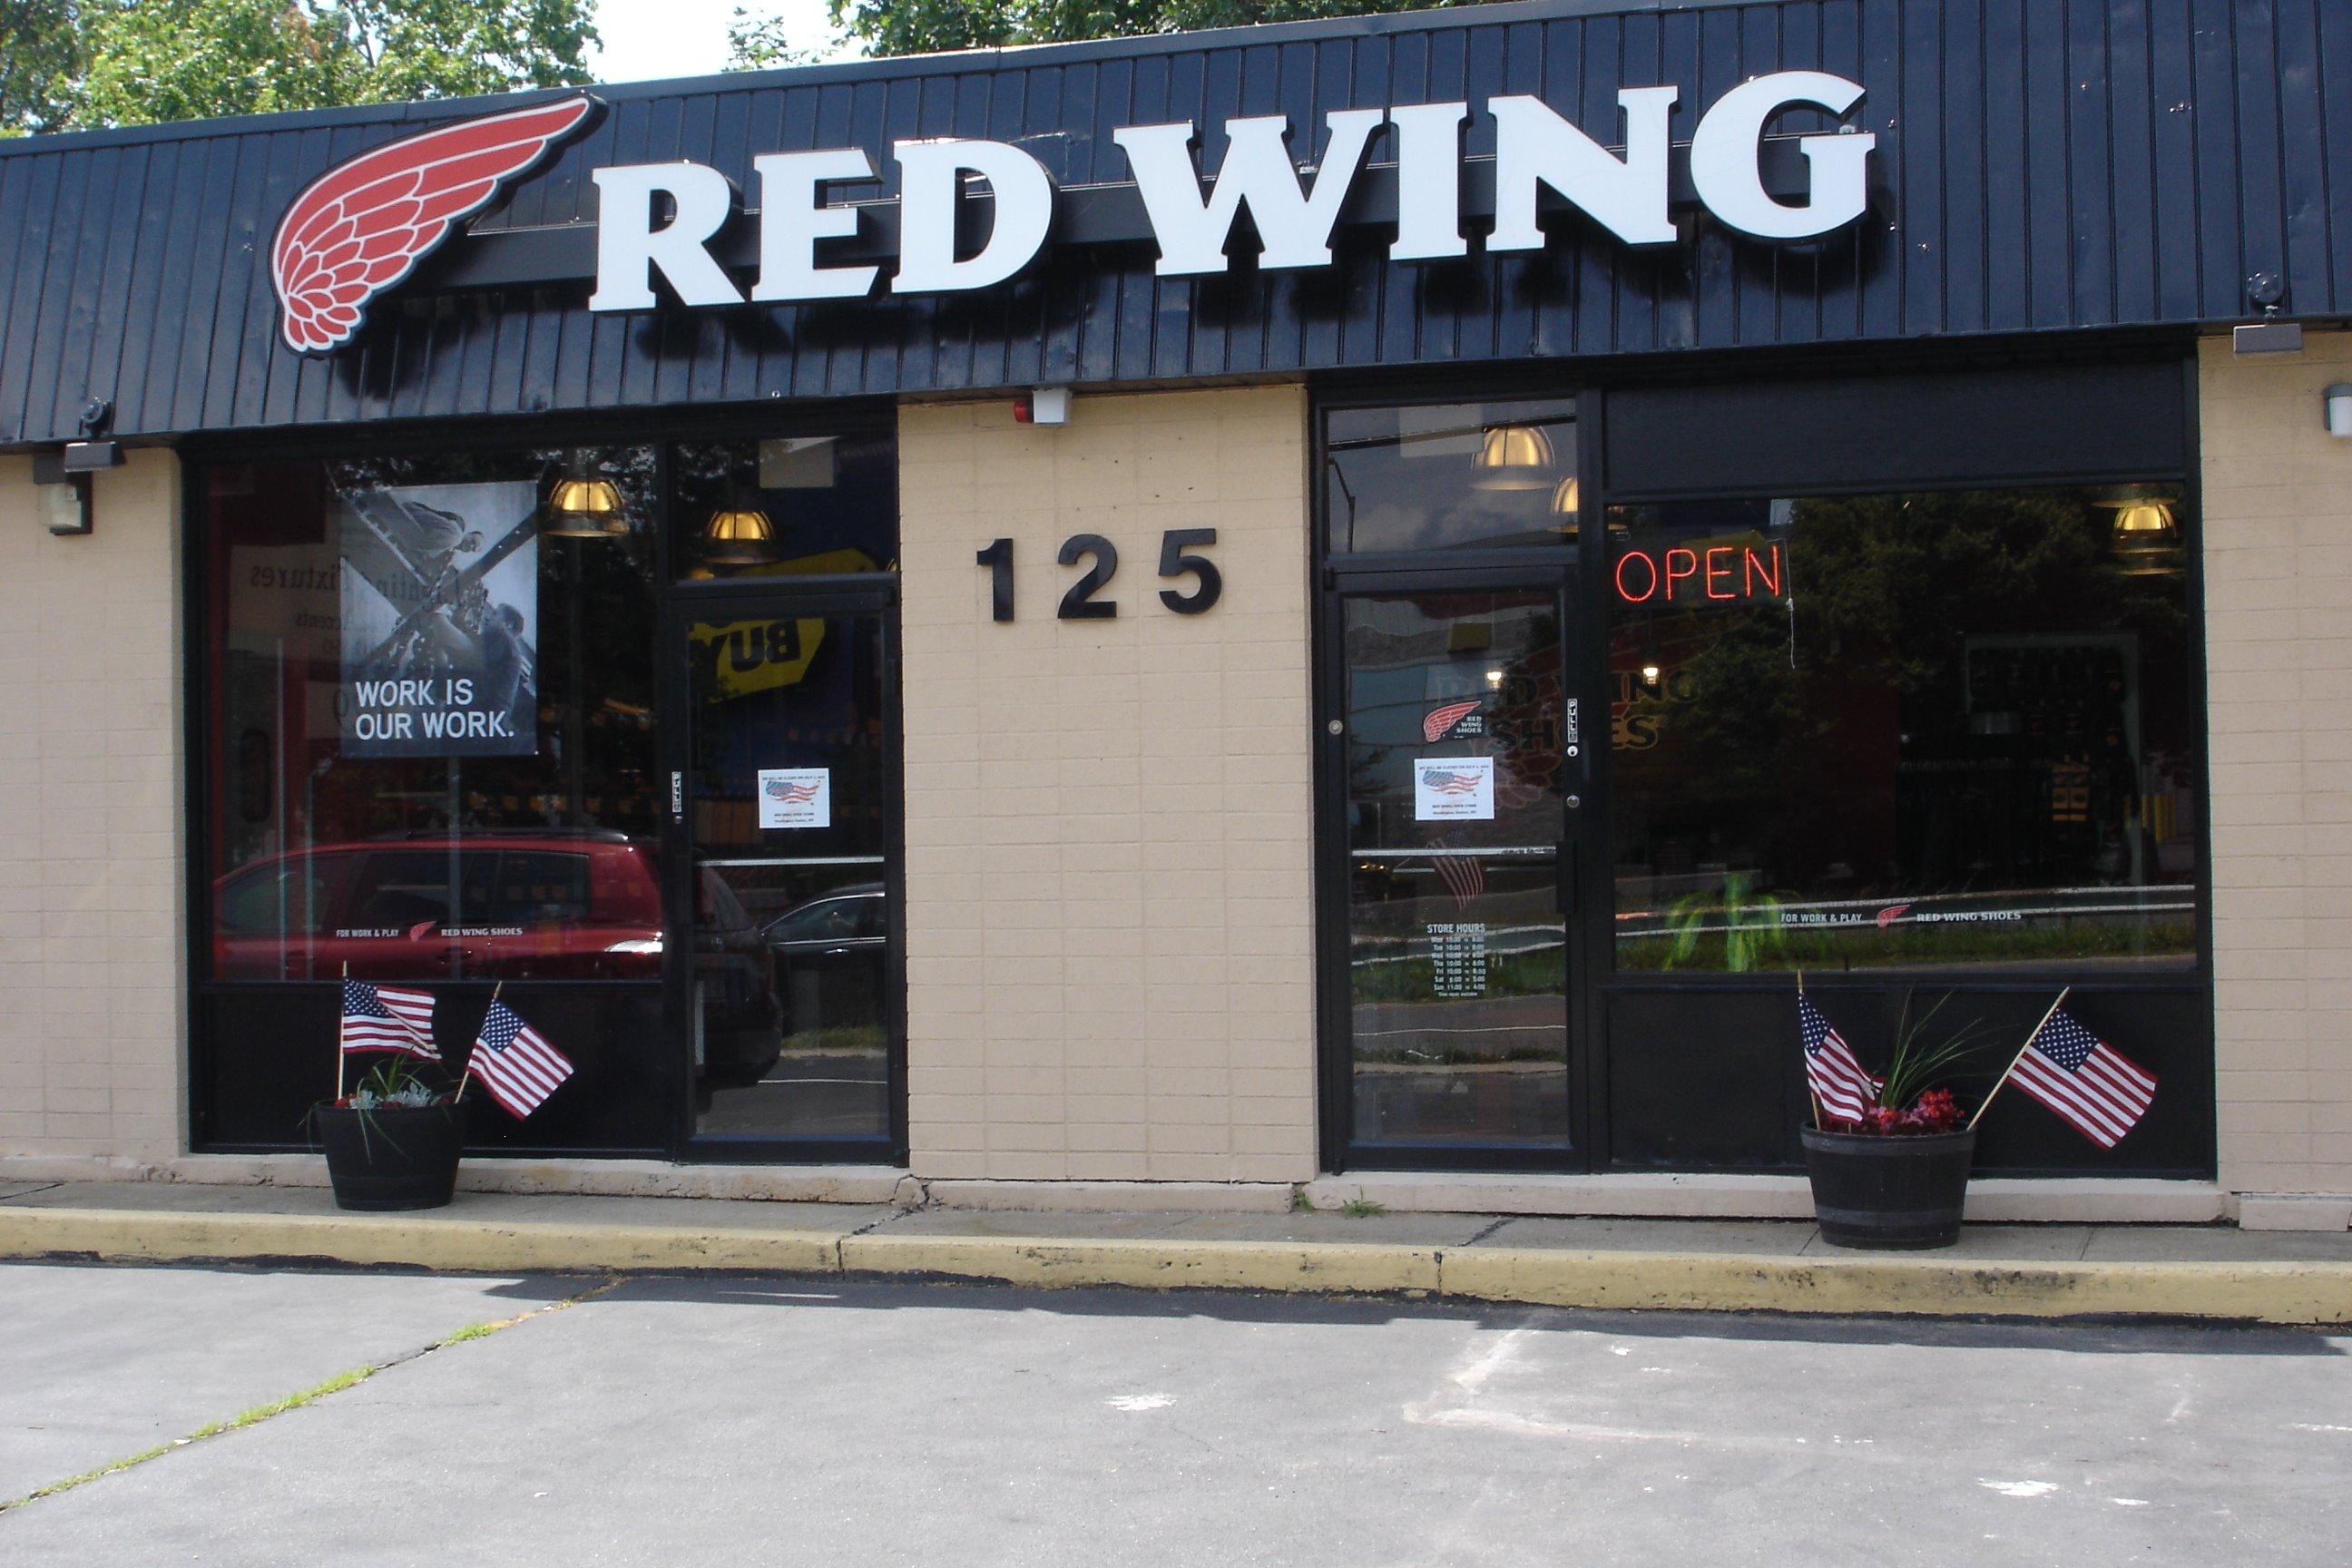 Red Wing Shoes Coupons near me in Huntington Station, NY 11746 | 8coupons